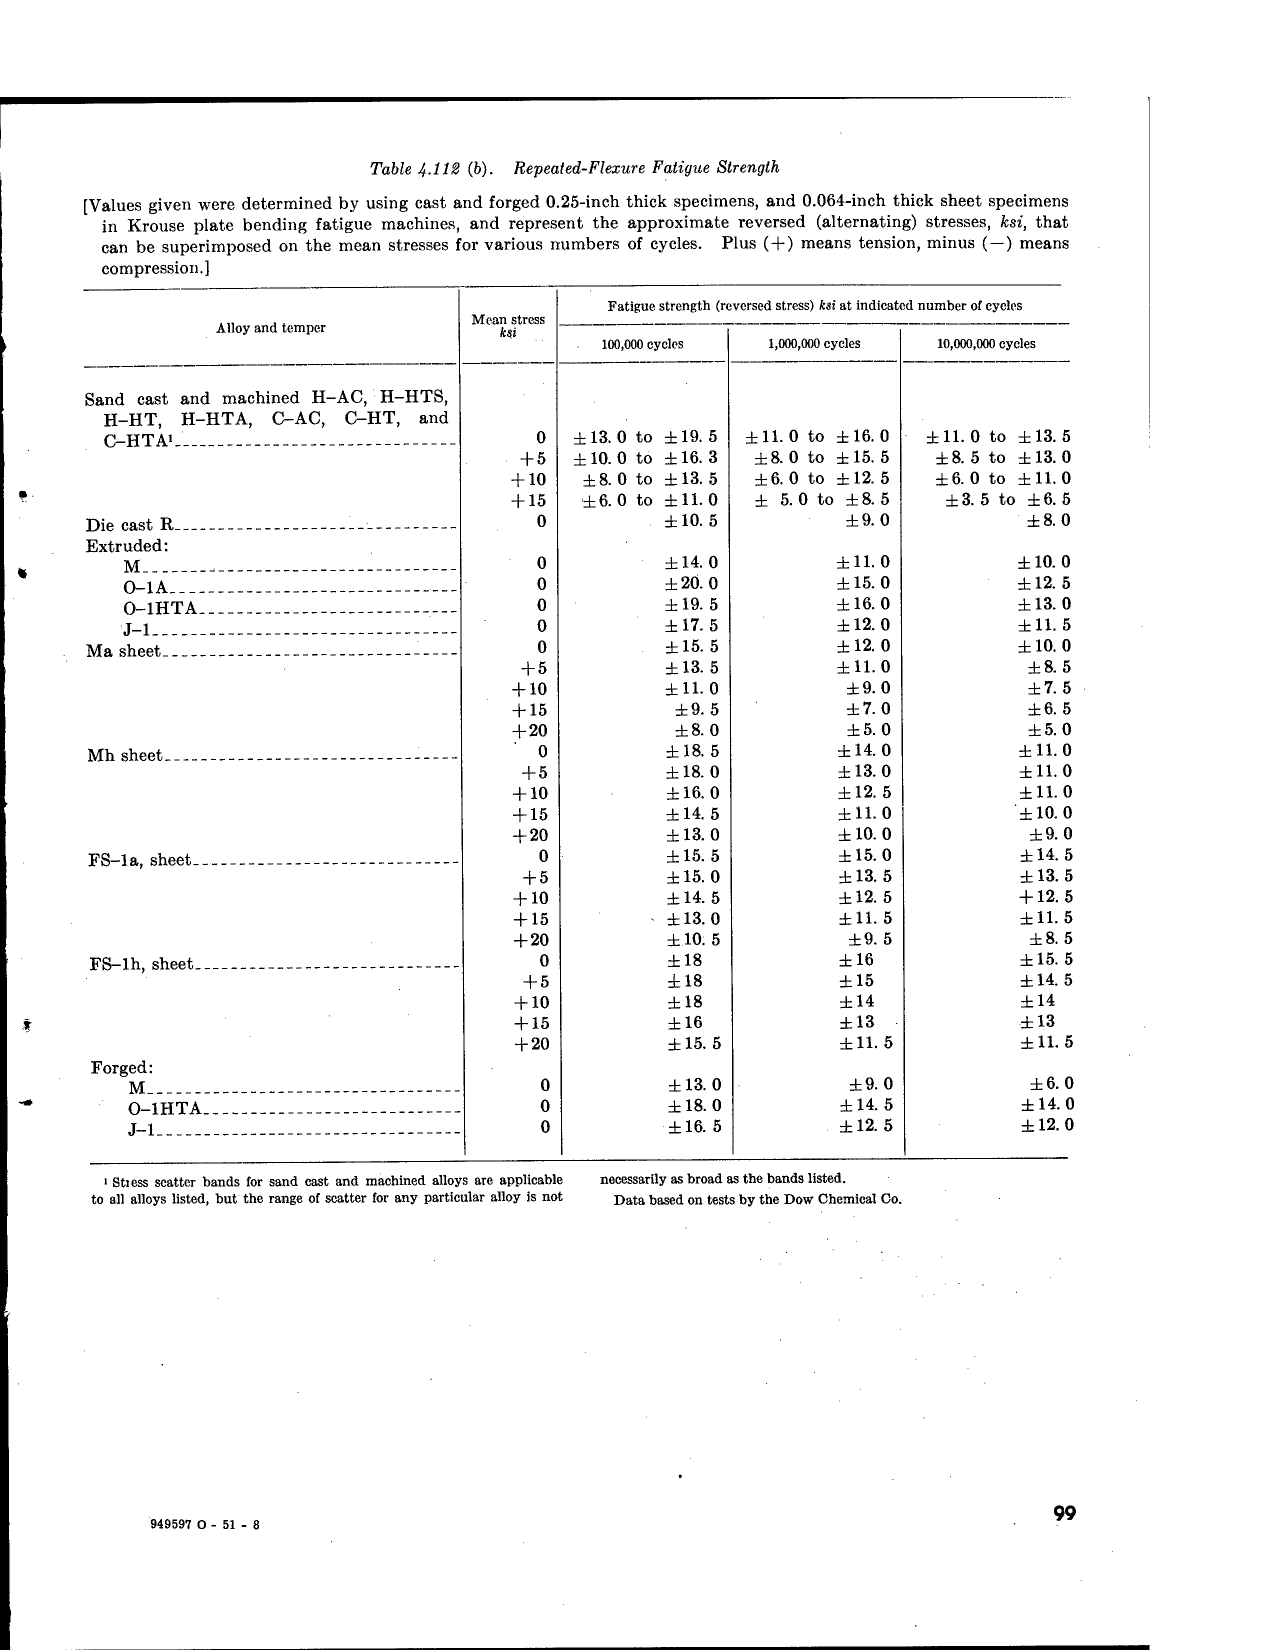 Sample page 113 from AirCorps Library document: Strength of Metal Aircraft Elements